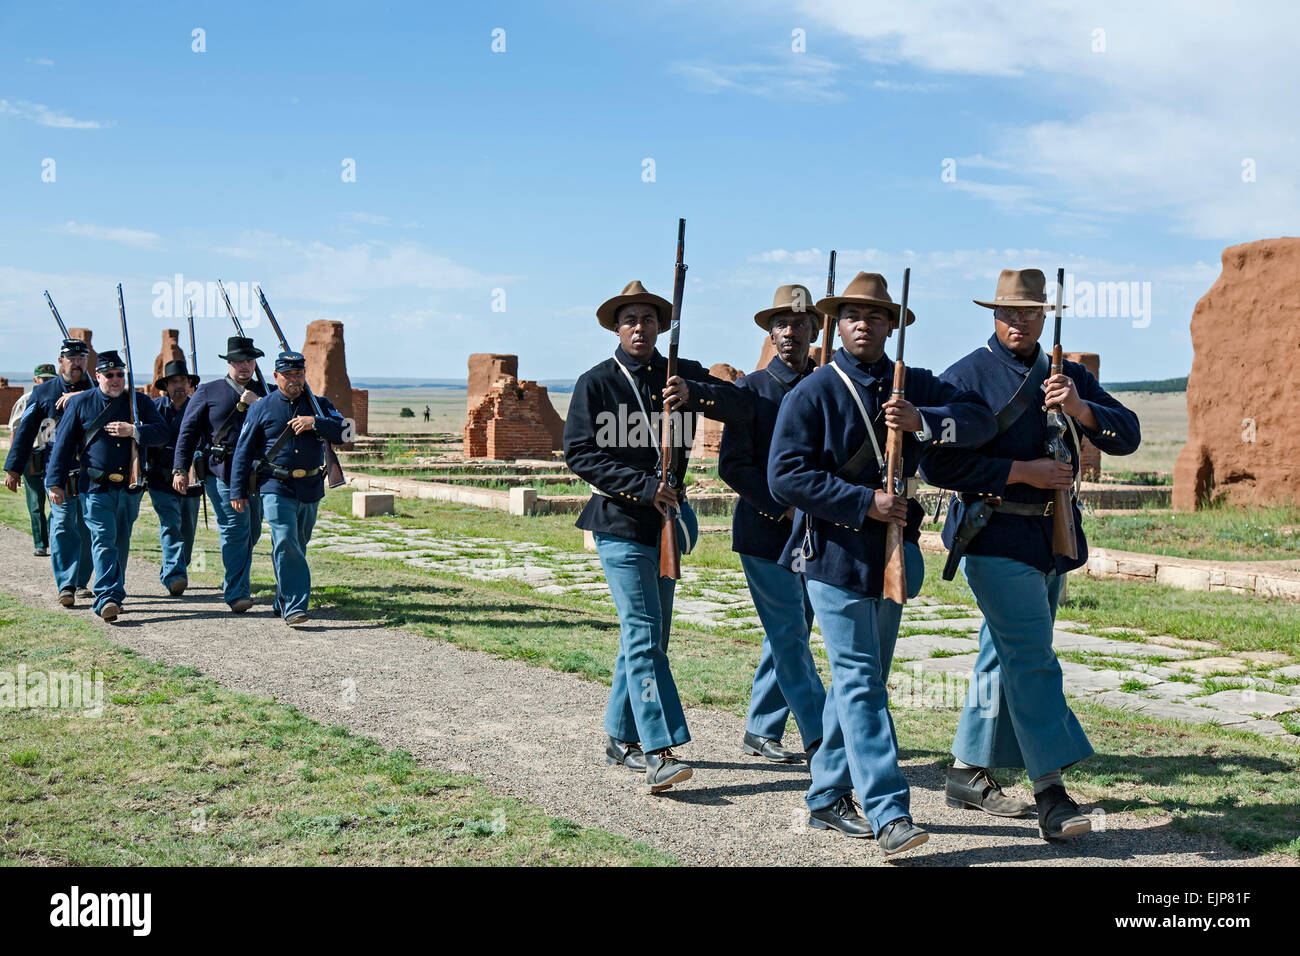 Civil War Era Buffalo Soldiers reenactors marching in formation, Fort Union National Monument, New Mexico USA Stock Photo